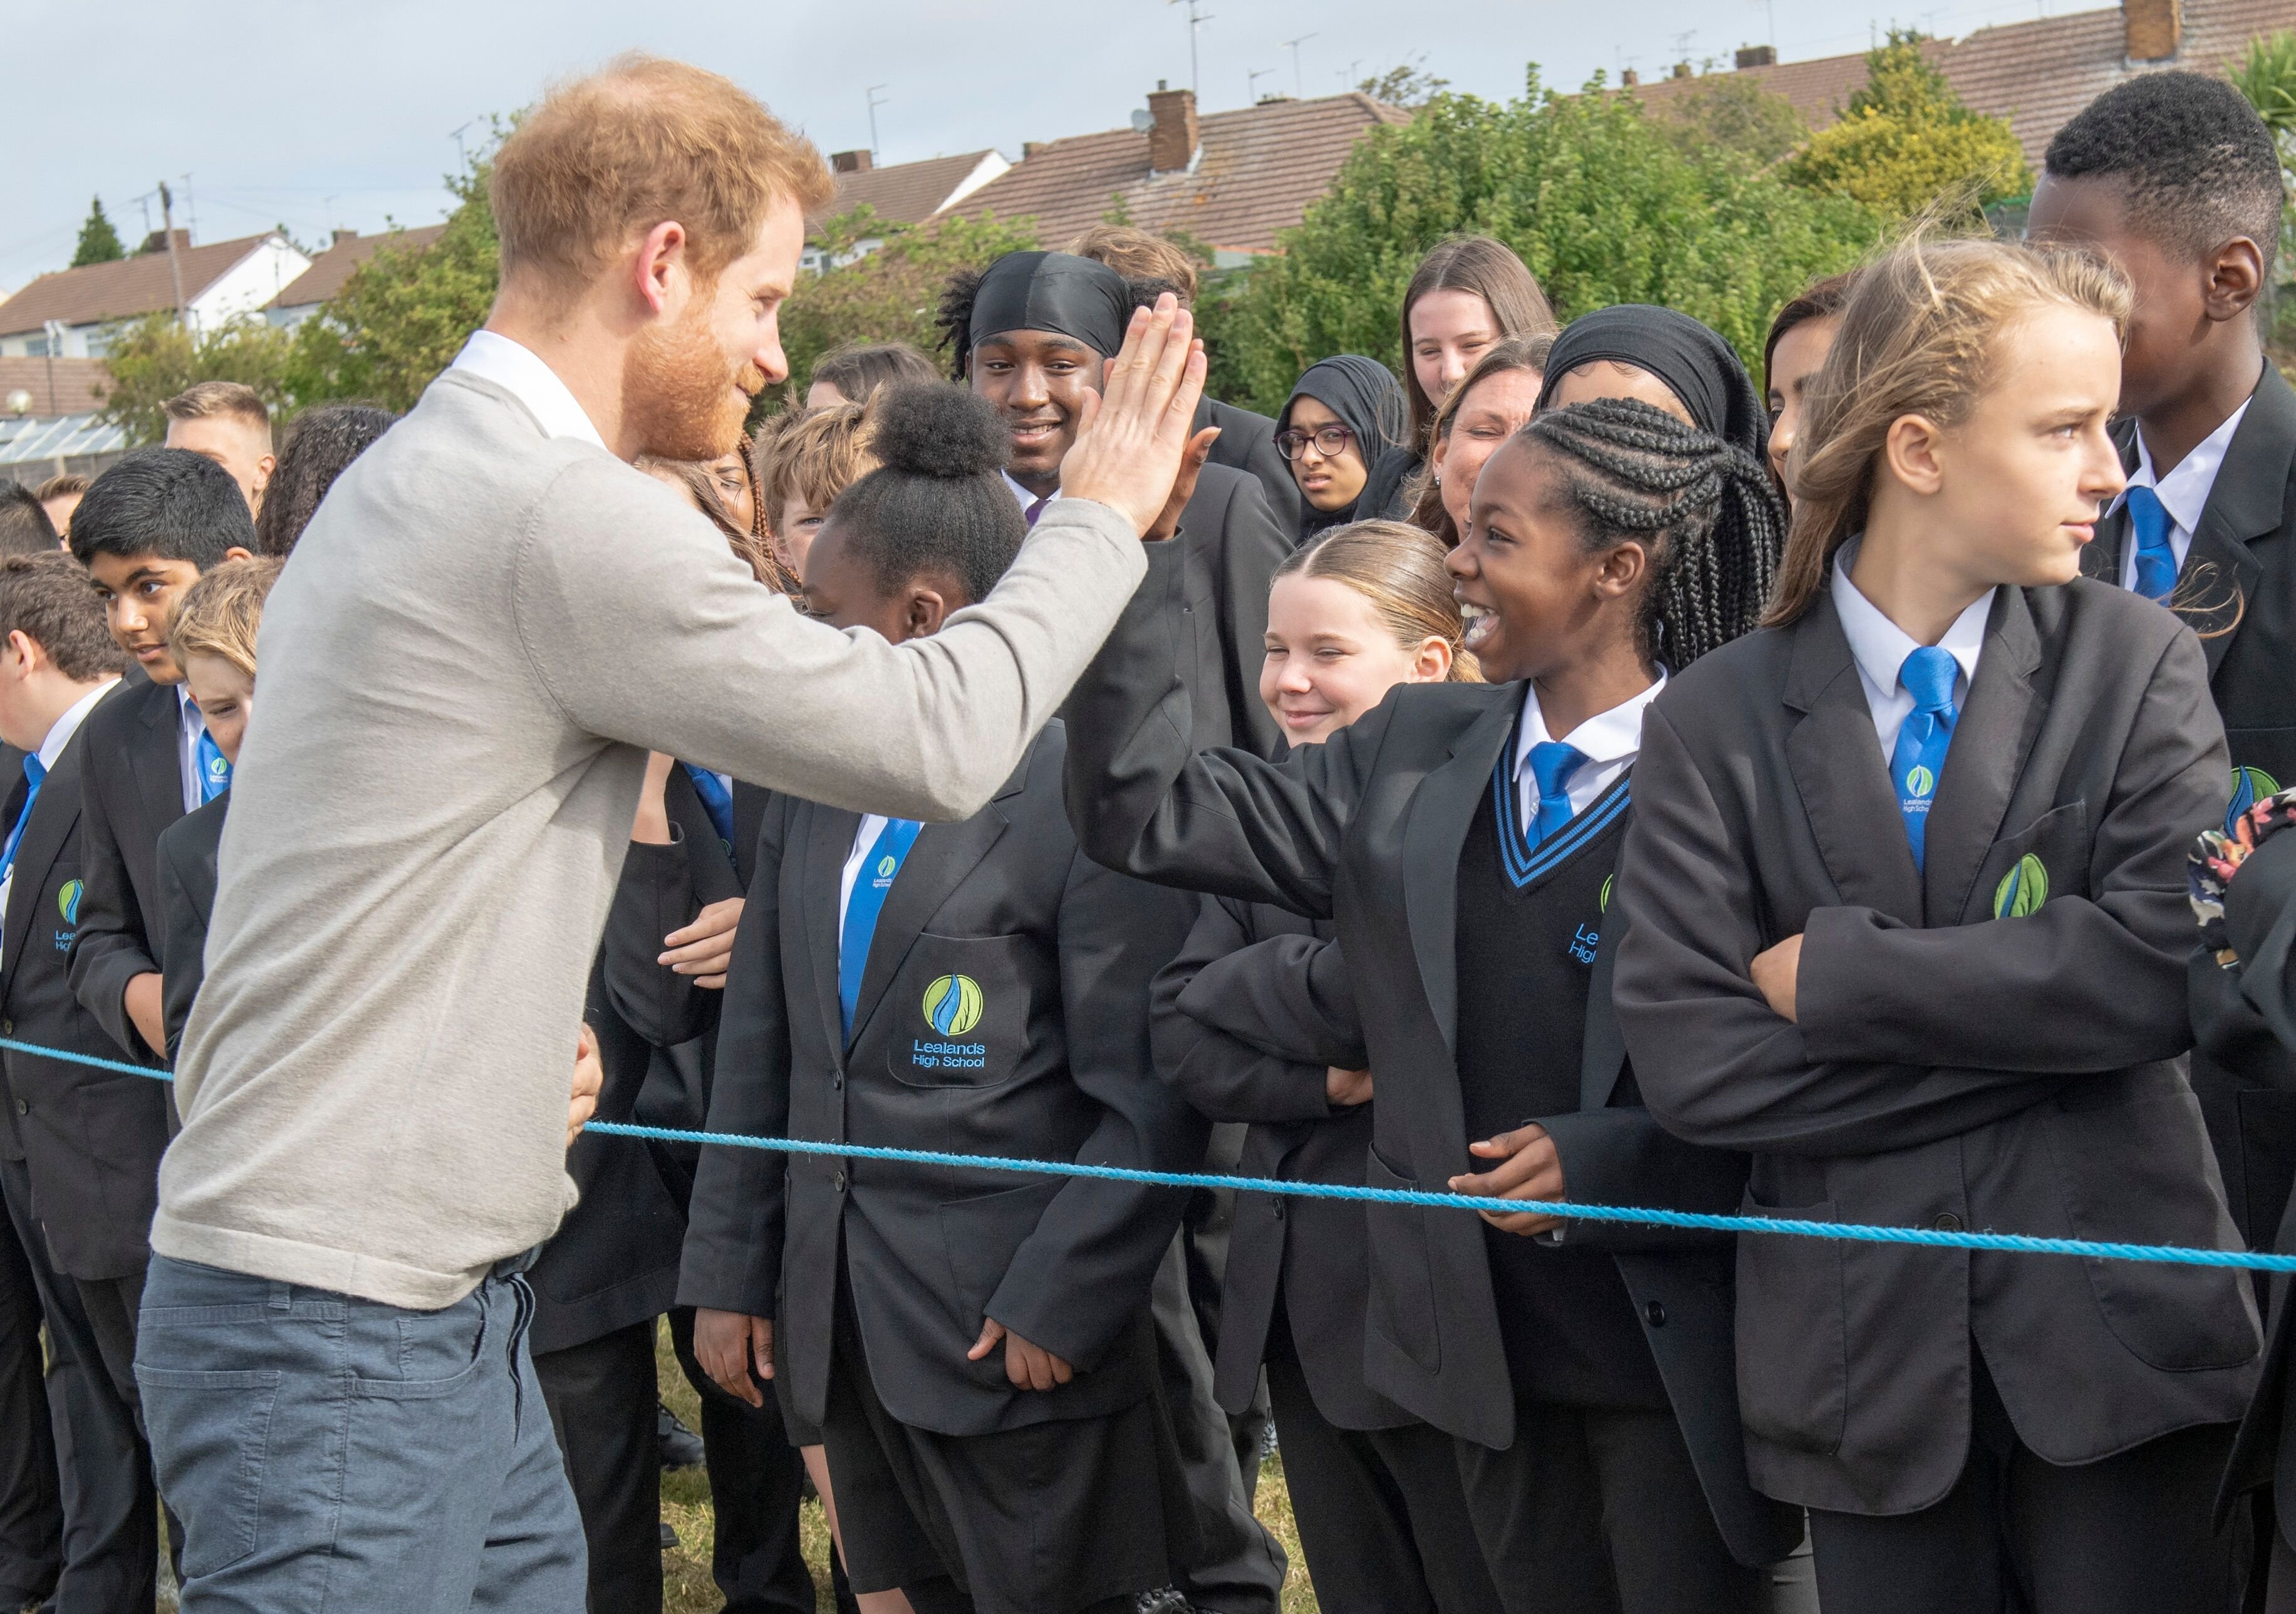 Prince Harry meets pupils during his visit to The Rugby Football Union All Schools Programme. | Source: Getty Images